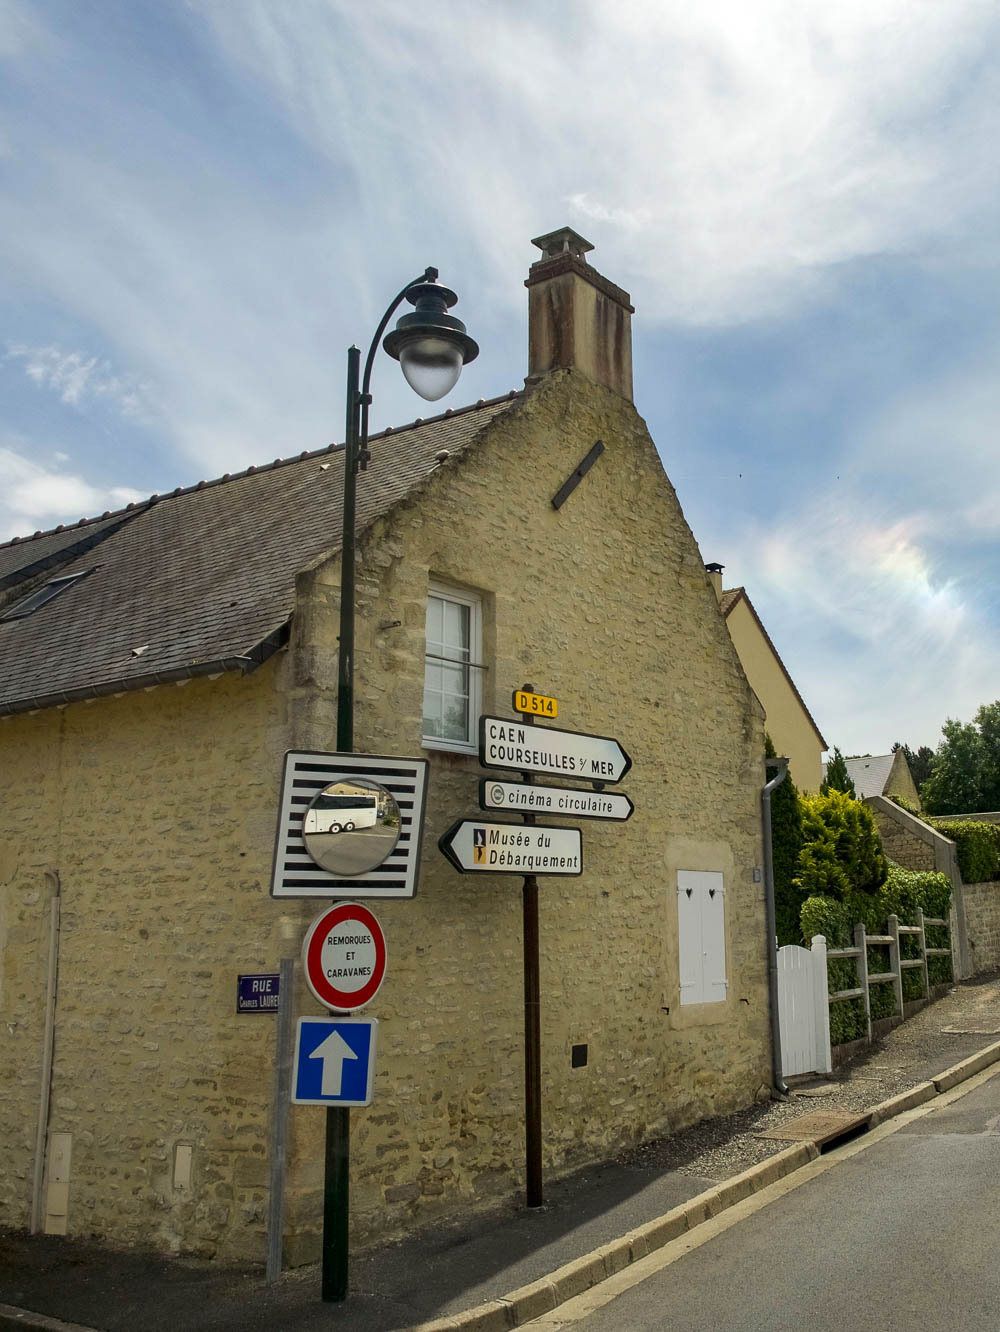 old stone building and street signs